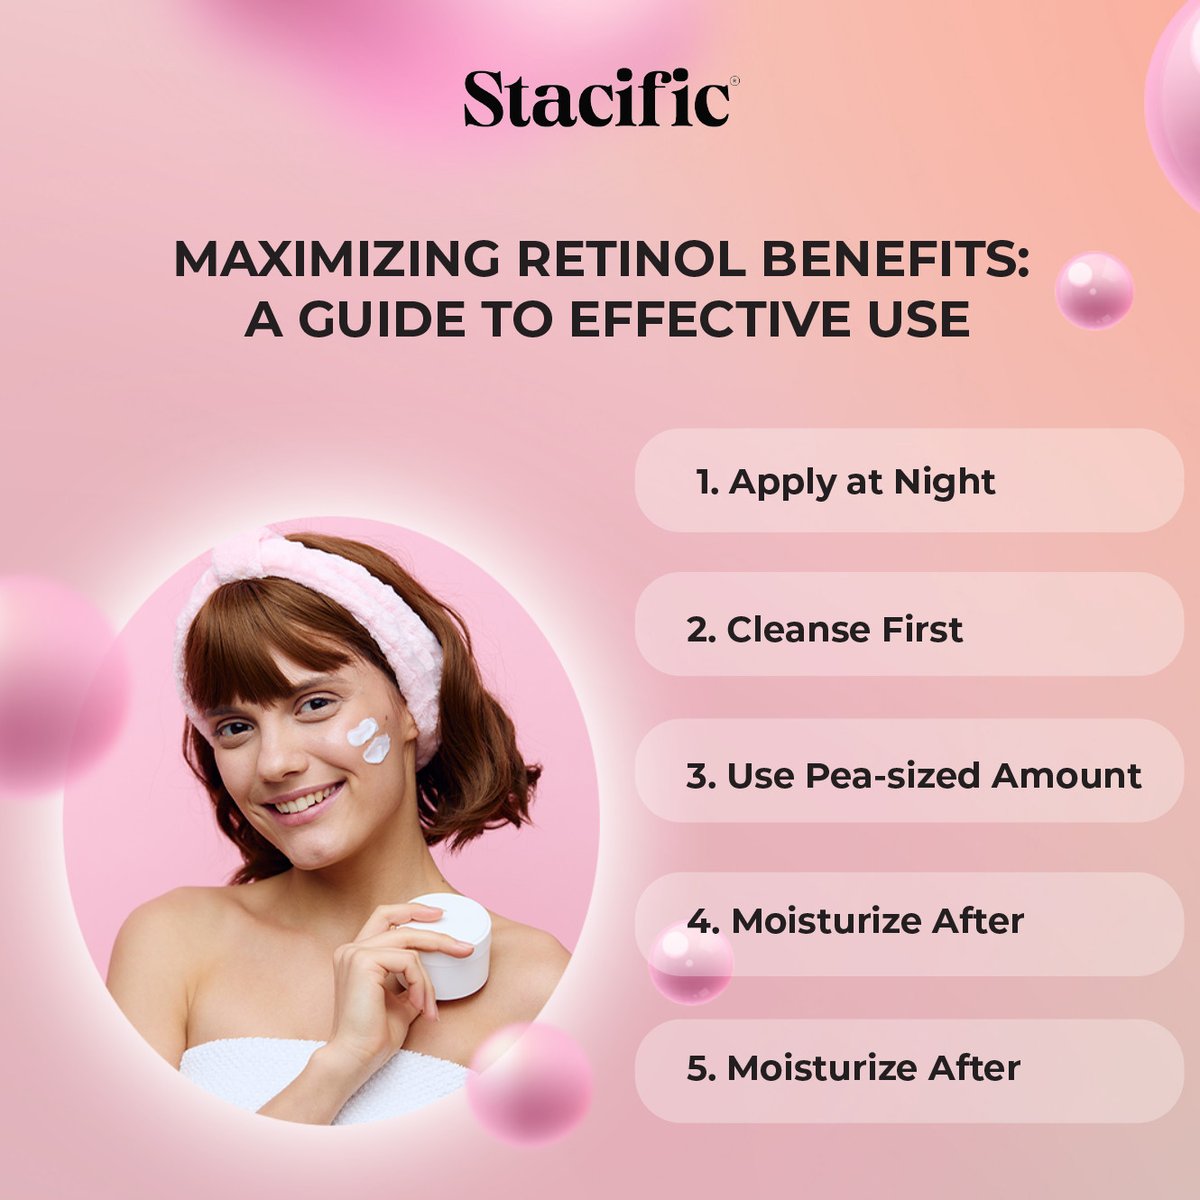 Retinol, hailed as a skincare superhero, can work wonders for your skin when used correctly. Here's how to make the most of its potent benefits.

#Stacific #skincaretips #SkincareRoutine #HealthySkin #GlowingSkin #BeautyTips #SkinCareProducts #ClearSkin #AcneTreatment #AntiAging